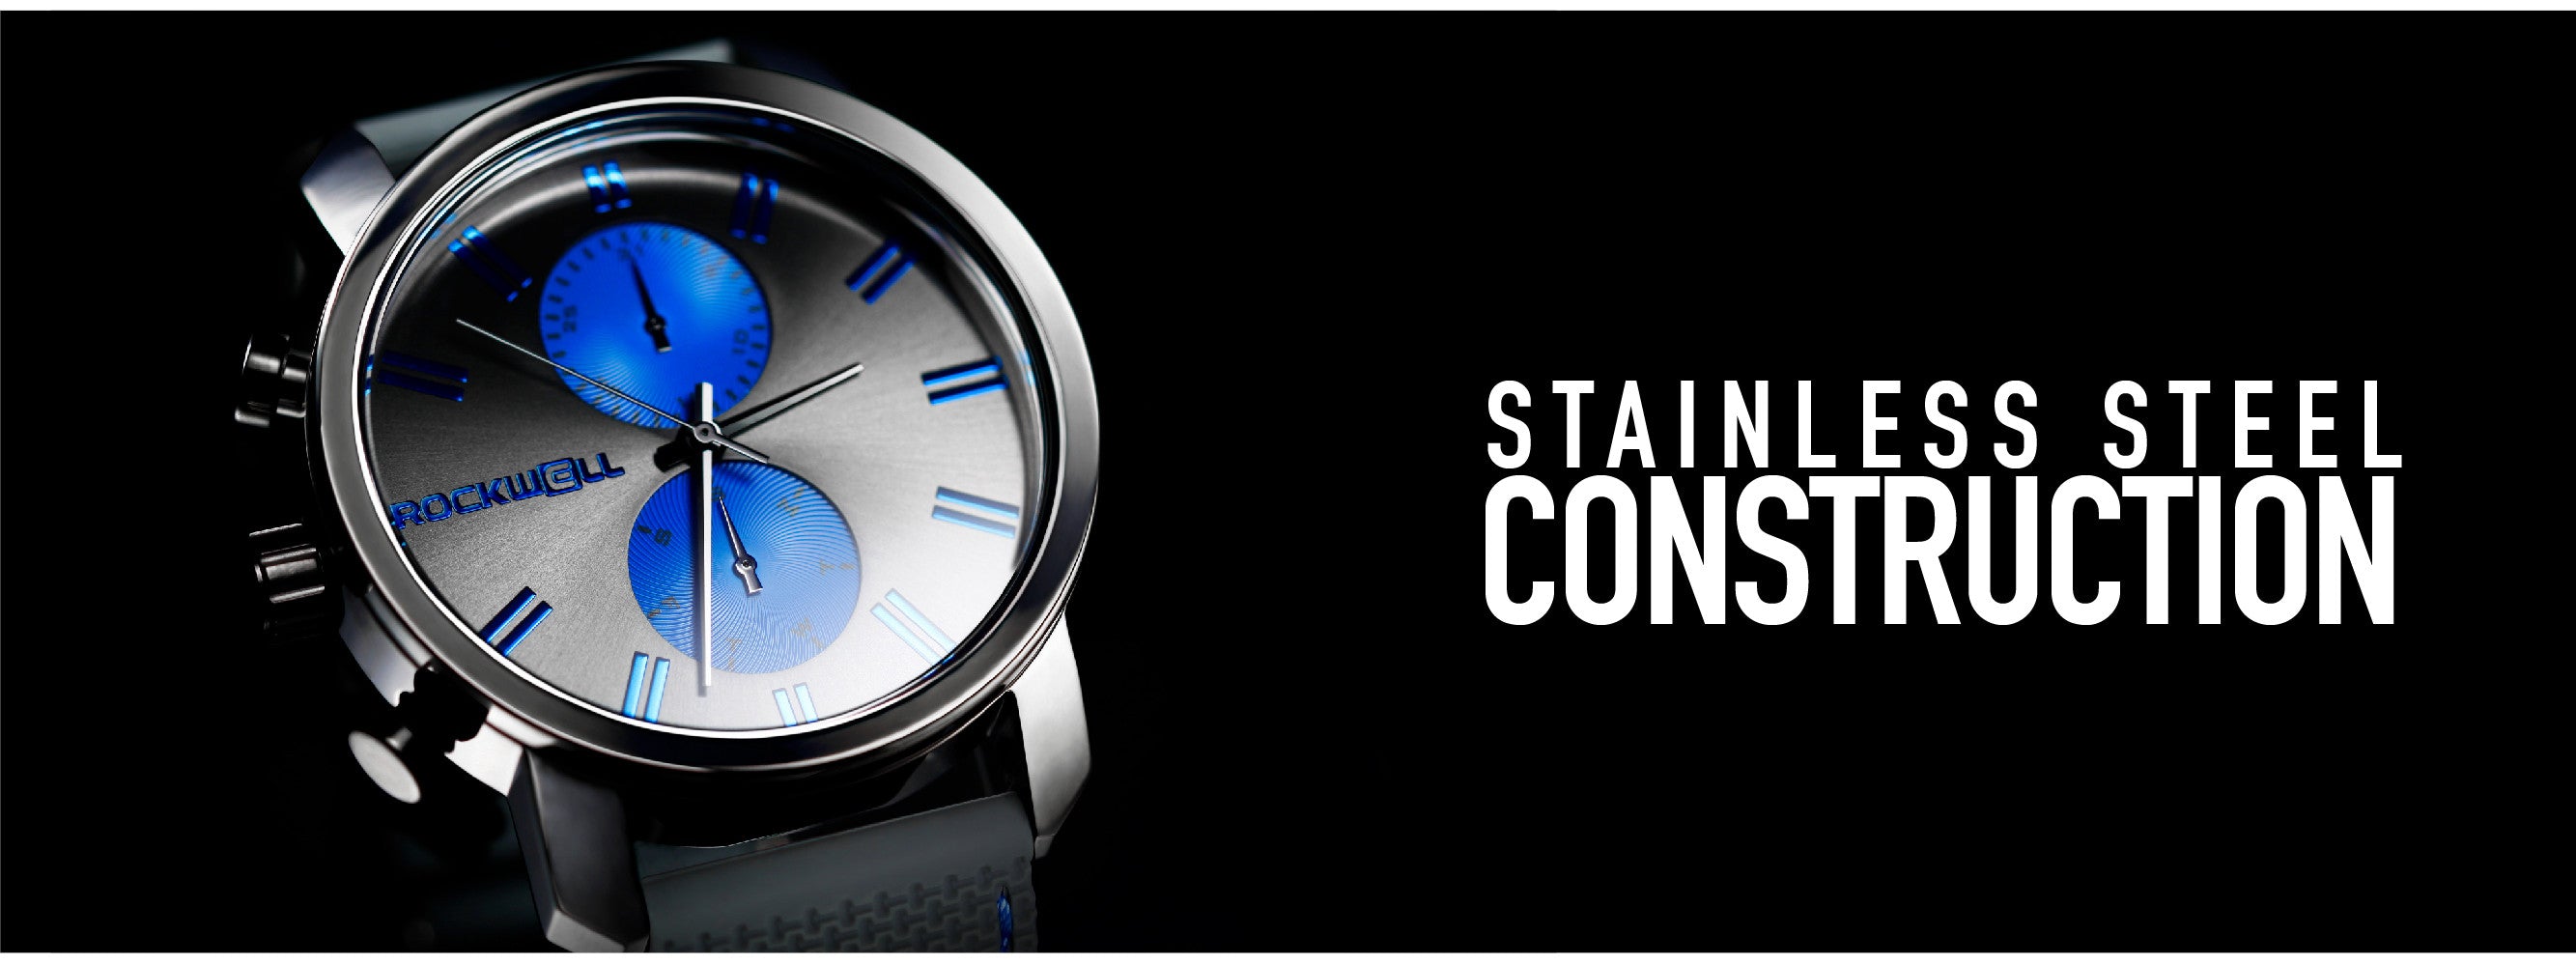 stainless steel construction on the apollo watch